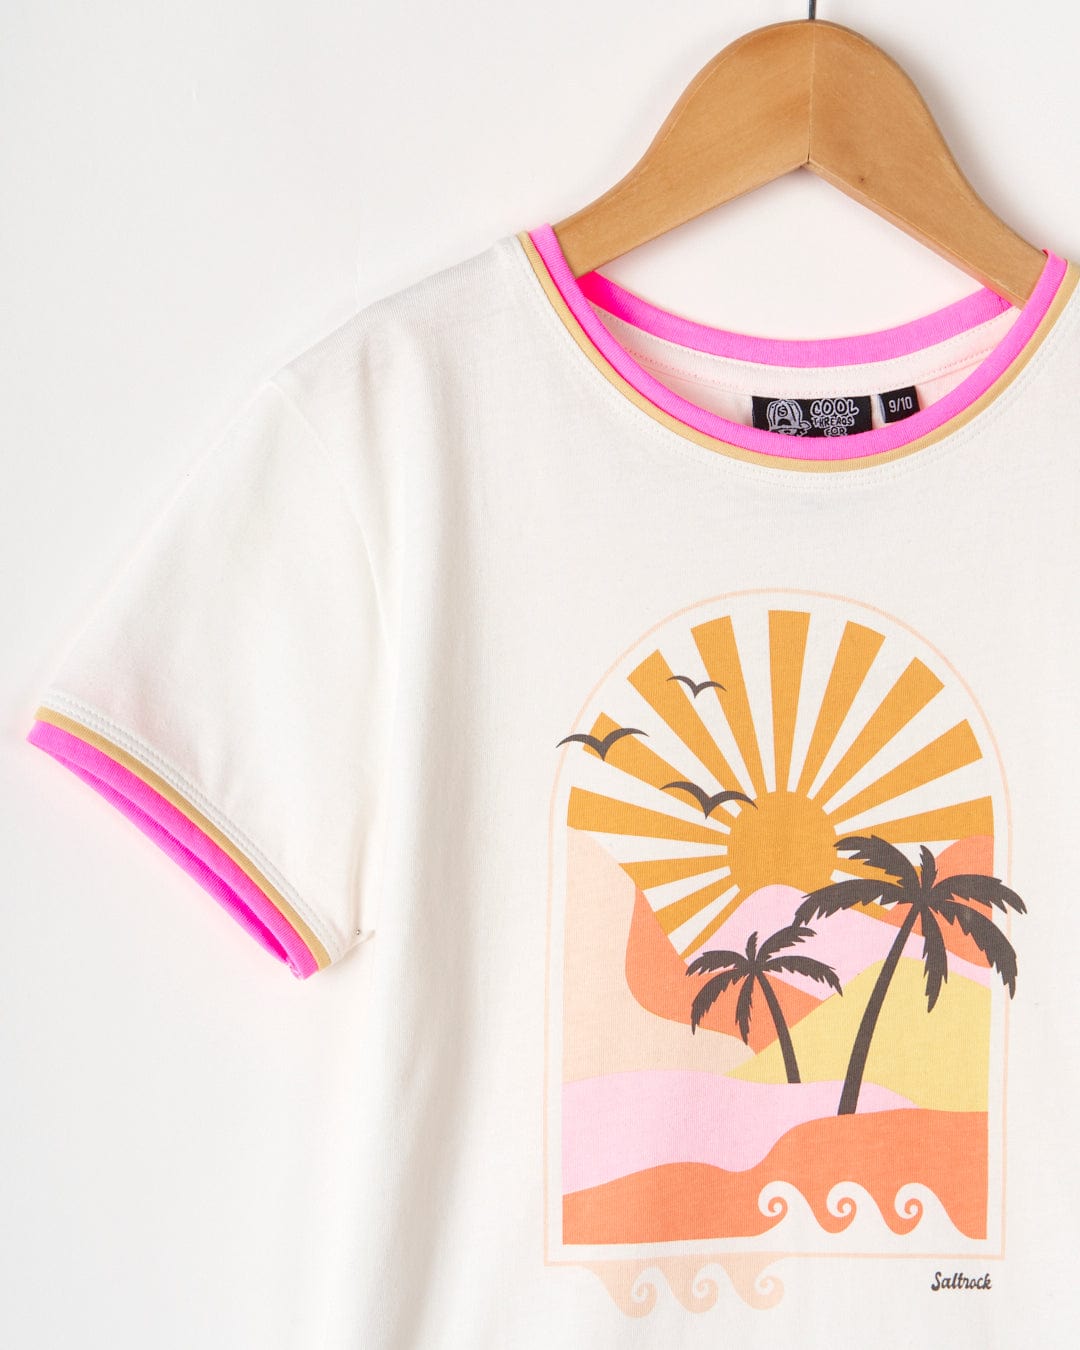 A Retro Seascape - Kids Short Sleeve T-Shirt - White with a sunset illustration of palm trees on the beach, made of 100% cotton by Saltrock.